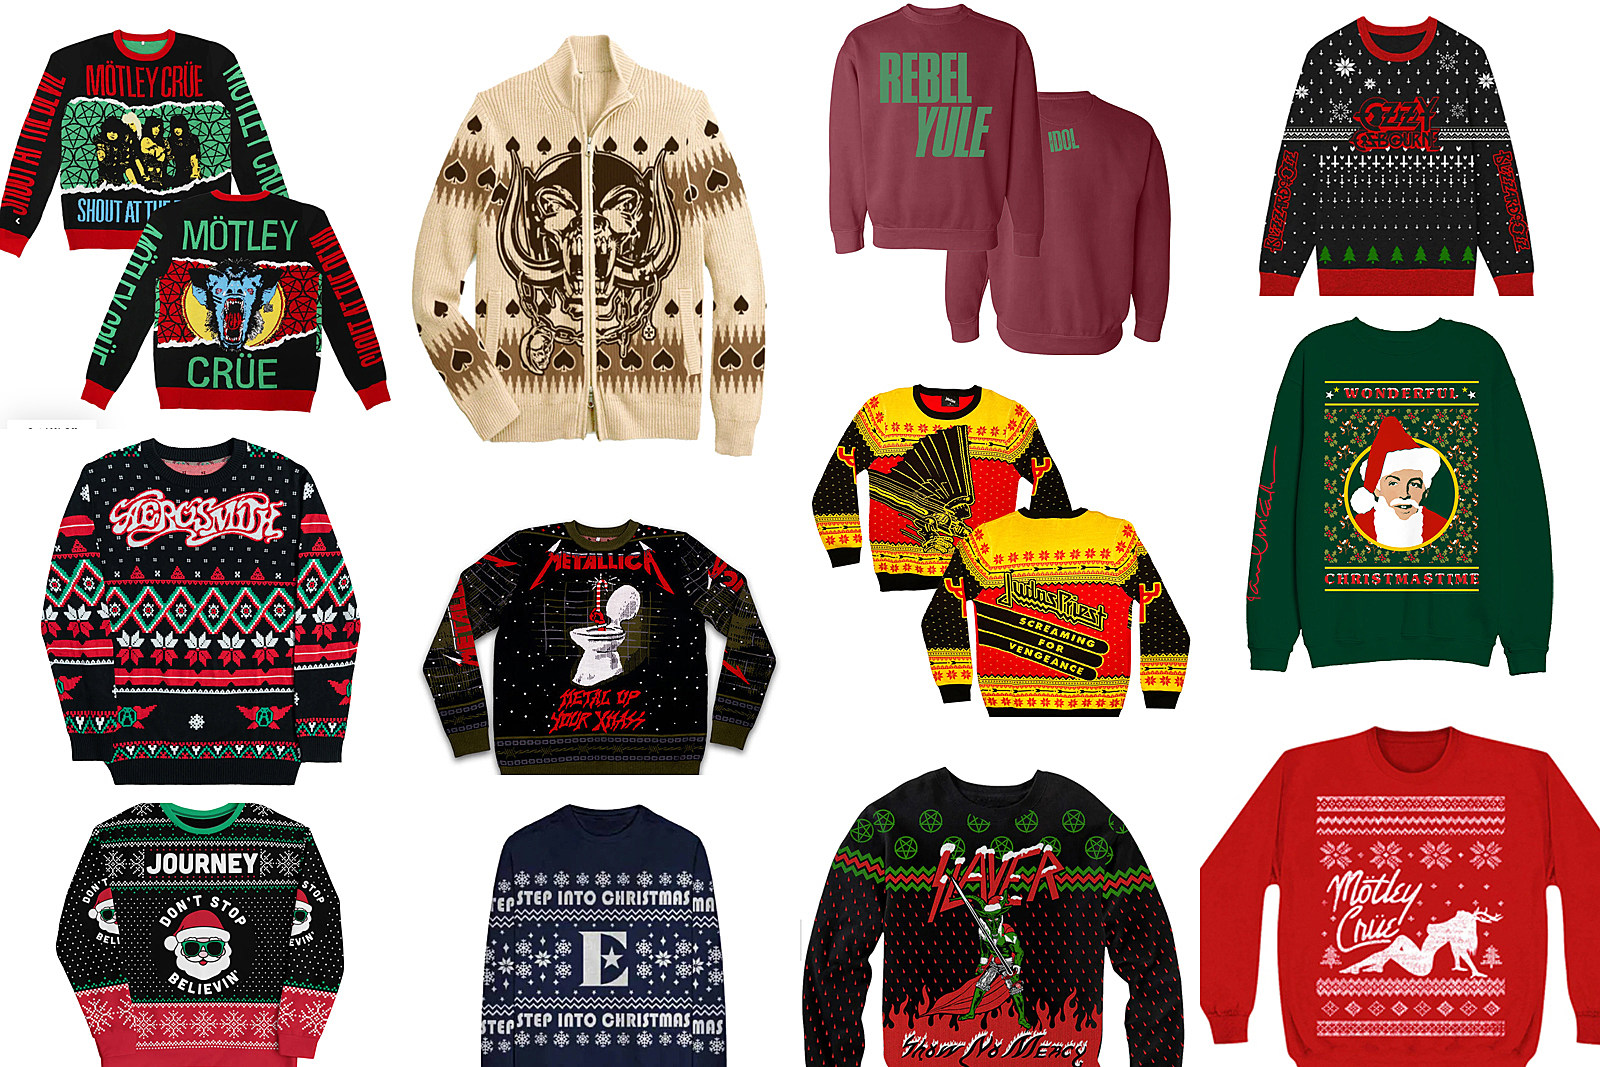 18 Rock Holiday Sweaters That Will Bring Shame to Your Family